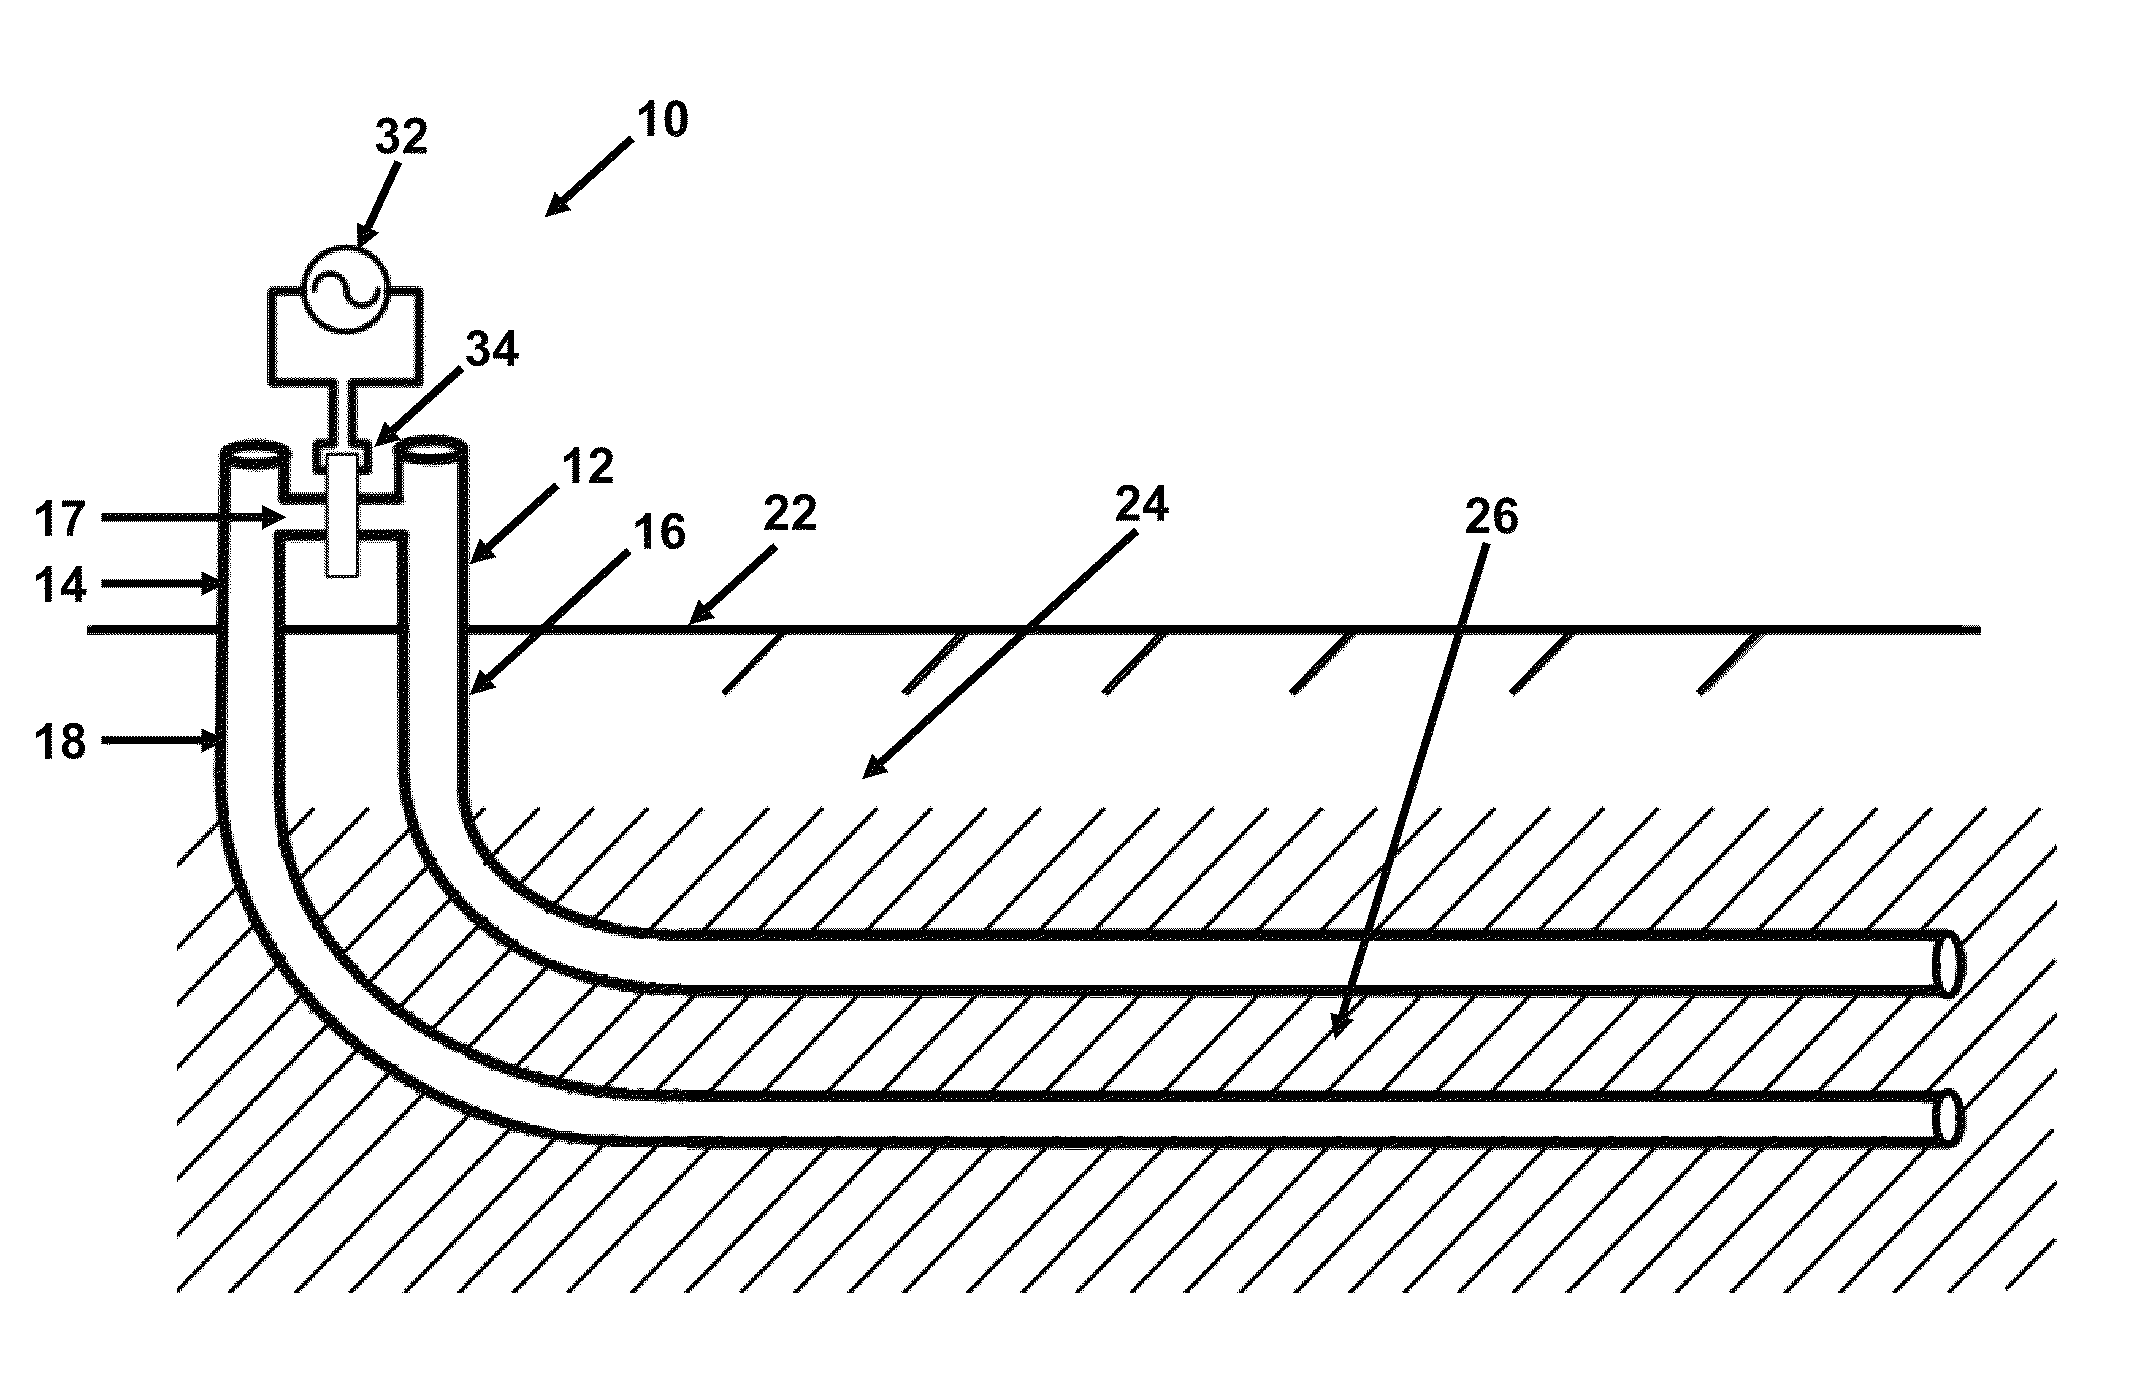 Apparatus and method for heating of hydrocarbon deposits by axial RF coupler